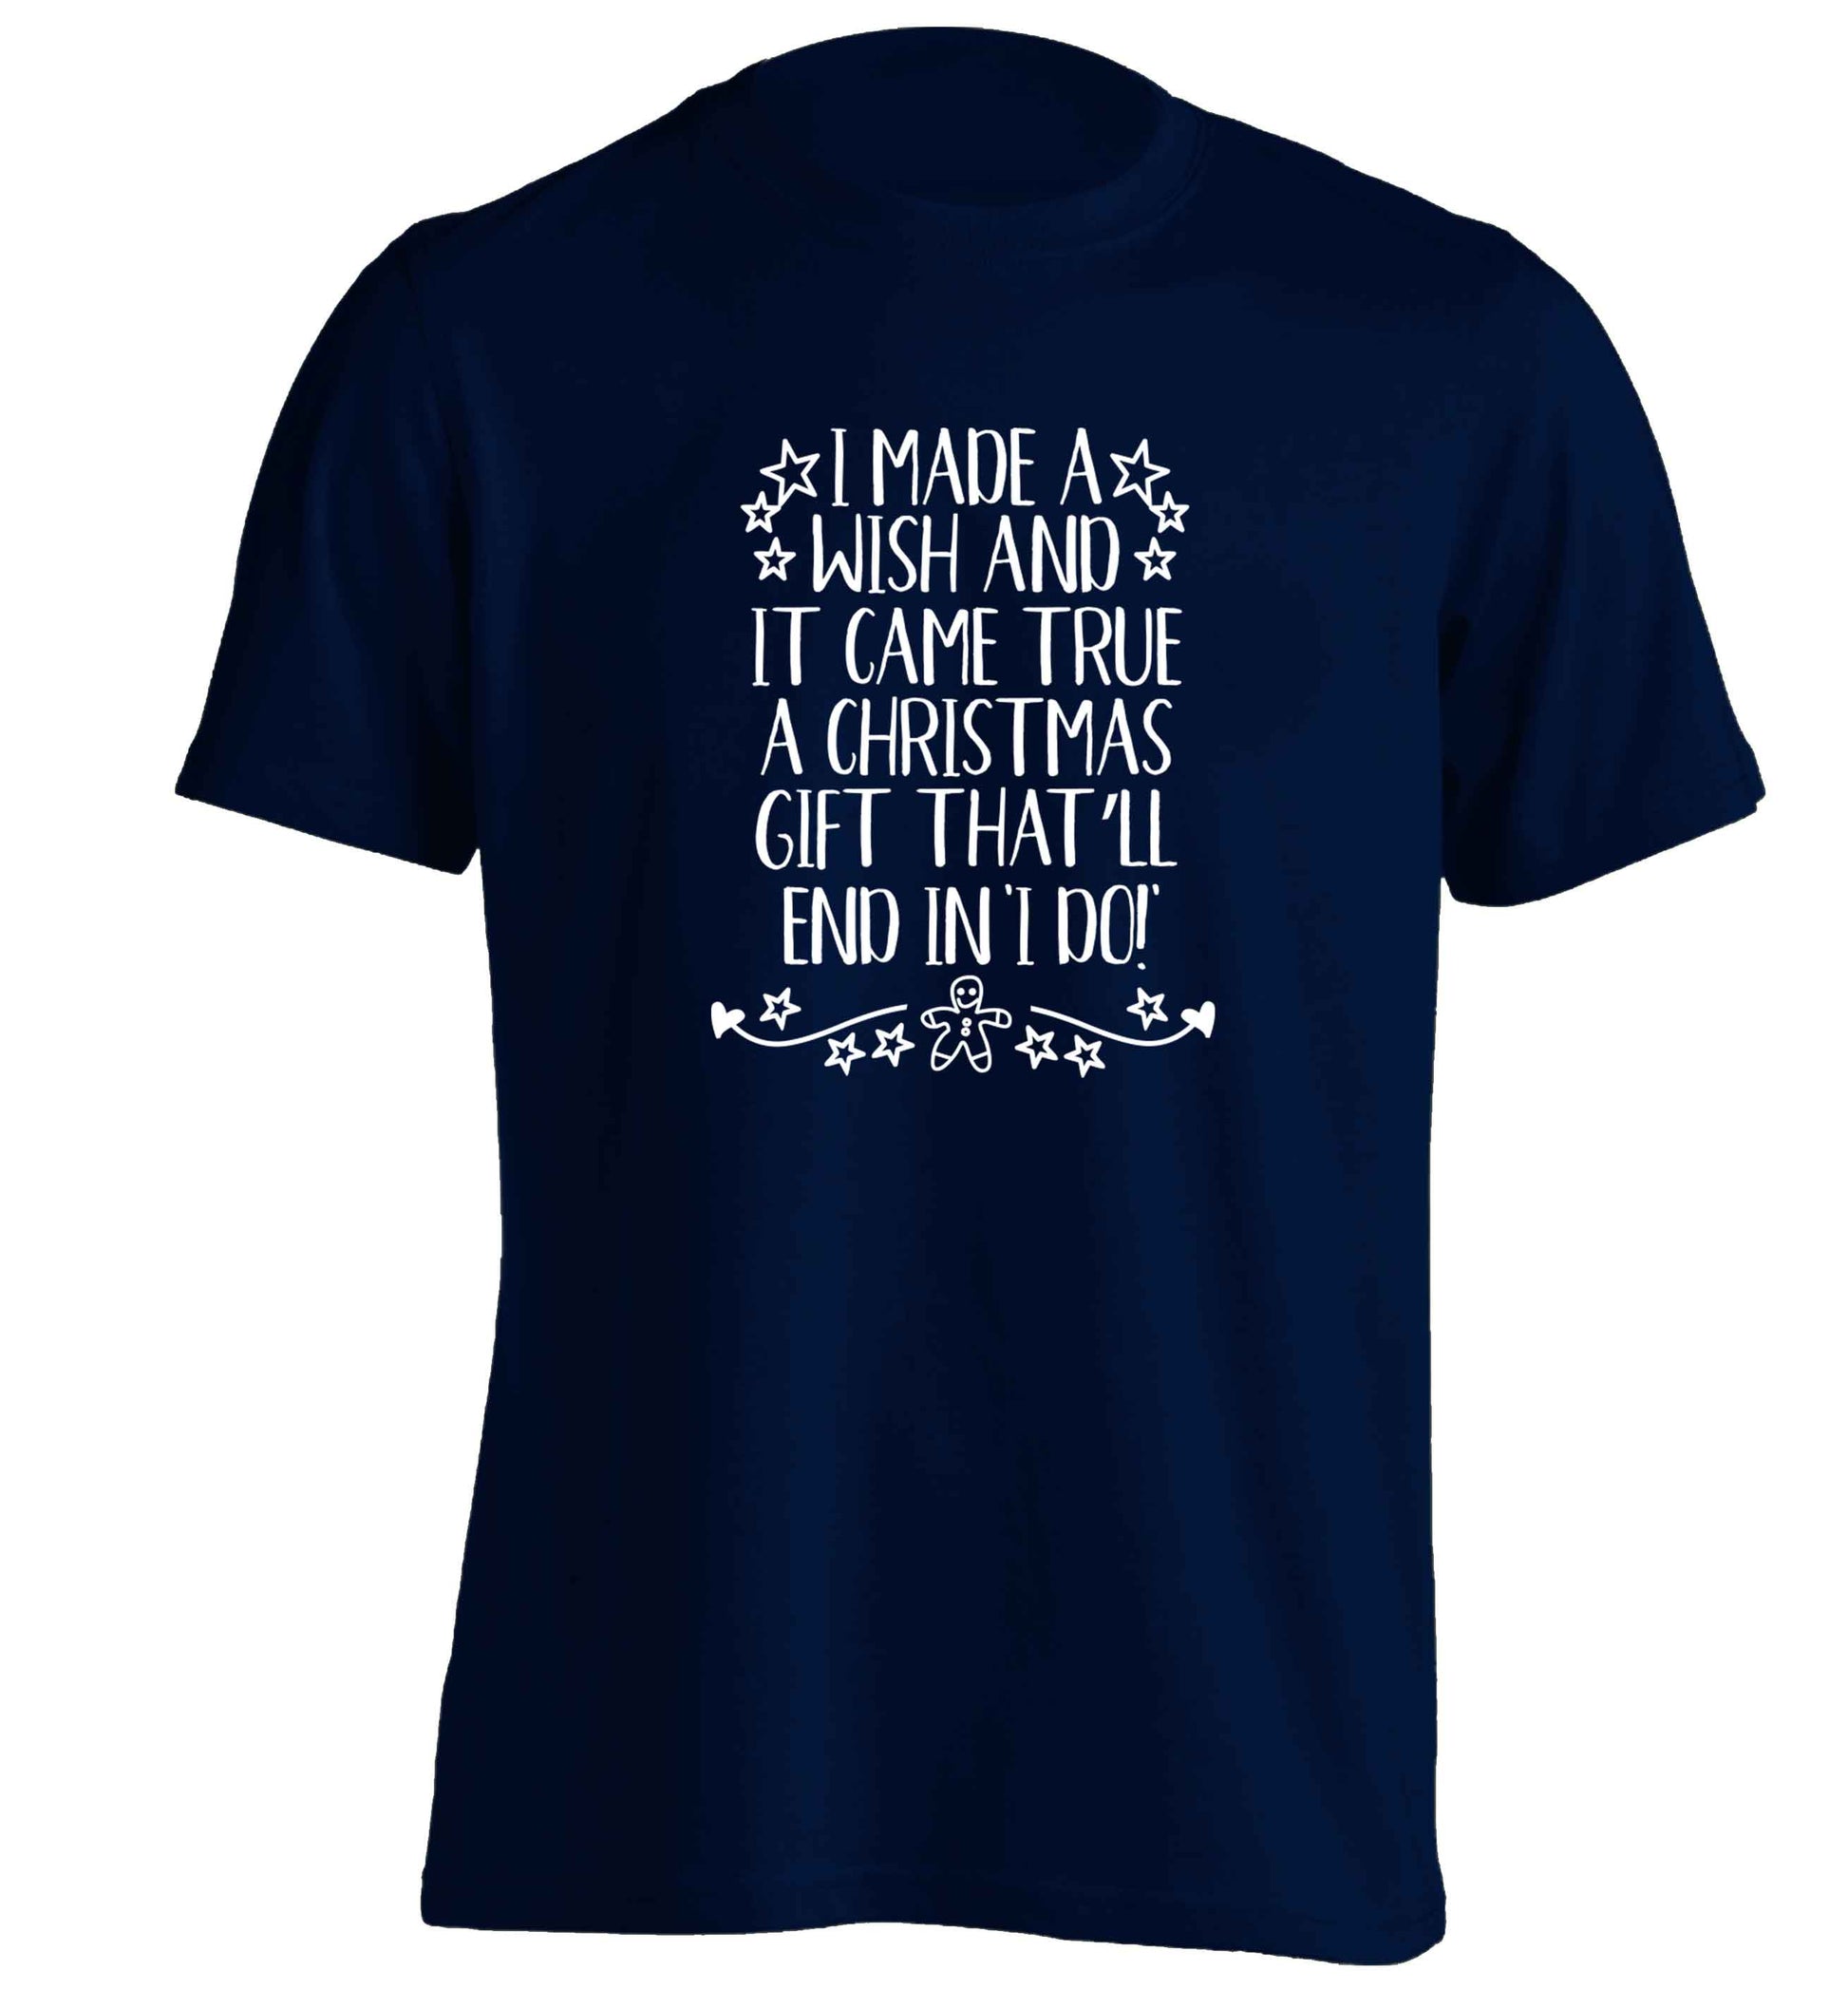 I made a wish and it came true a Christmas gift that'll end in 'I do' adults unisex navy Tshirt 2XL